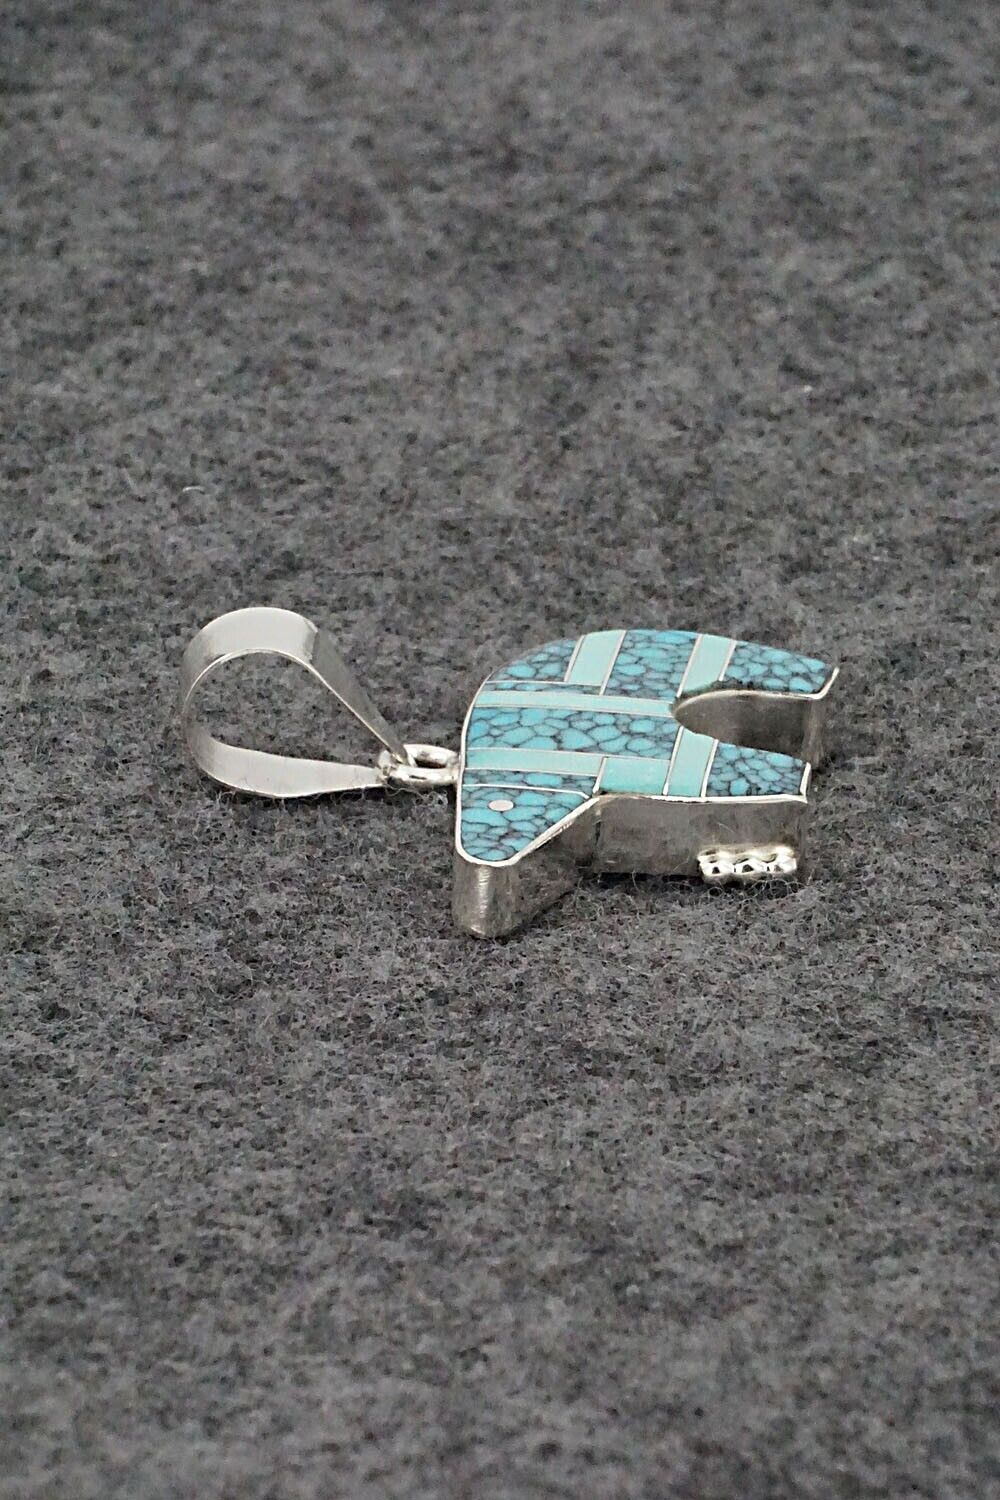 Turquoise & Sterling Silver Pendant - Edison Yazzie